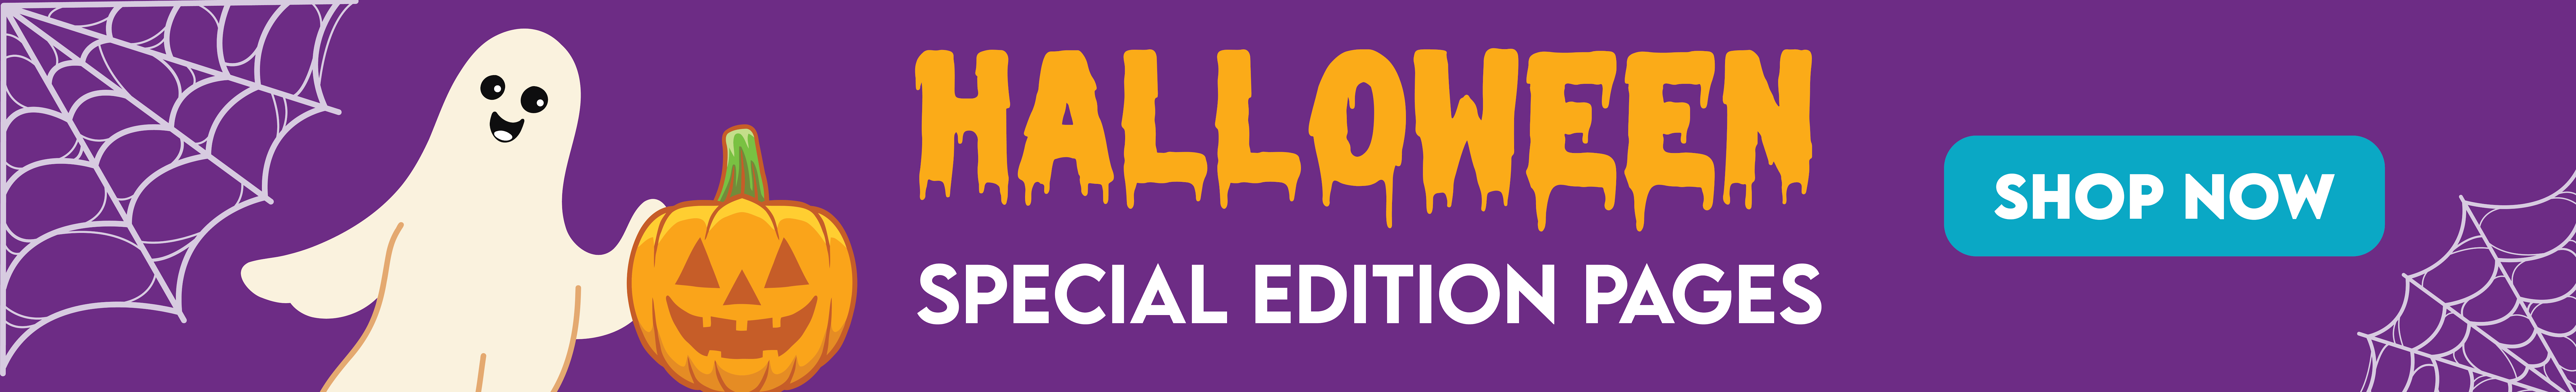 Out now Halloween special edition pages. For a limited time only